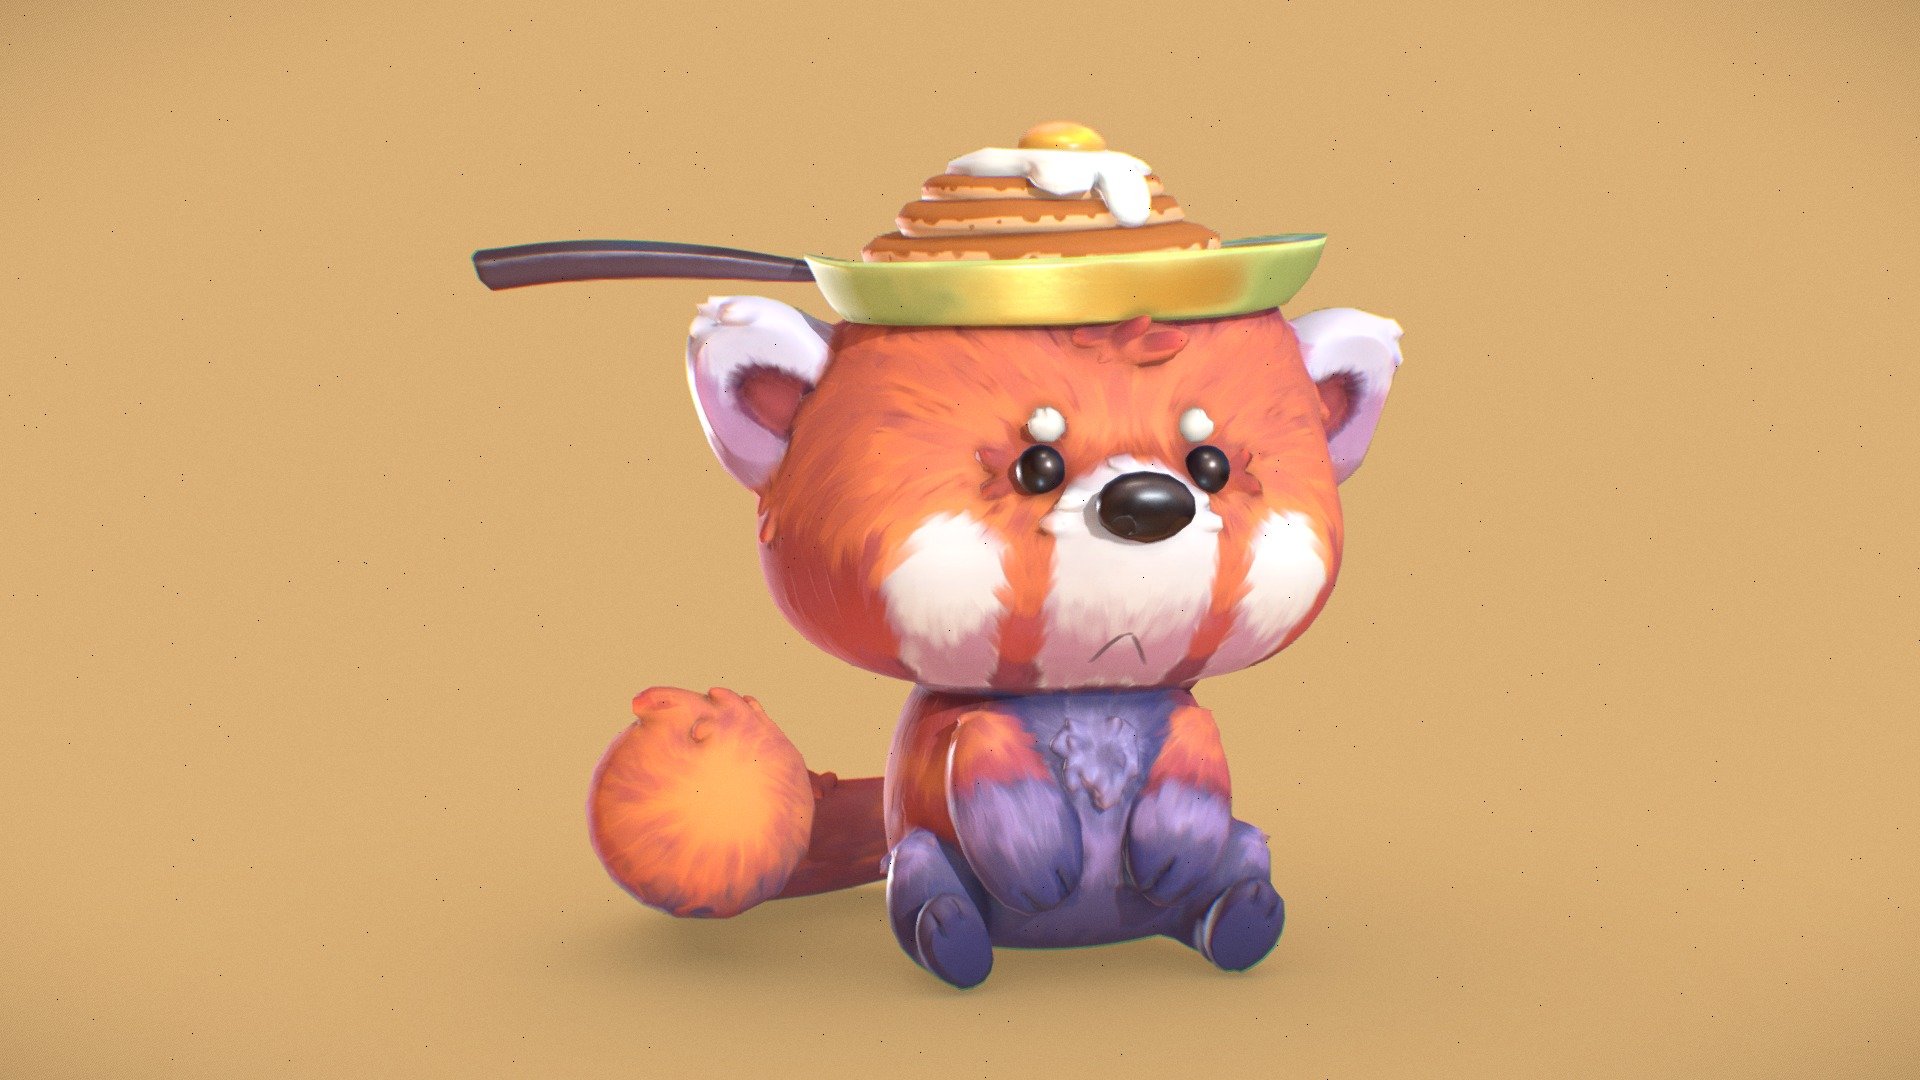 Red Frying Panda for my Stylized Creation assignment at Howest DAE. Based on a concept of Piper &lsquo;Piperdraws' Thibodeau.

He be sad because he hungry but his stubby arms cannot reach the pancakes 3d model